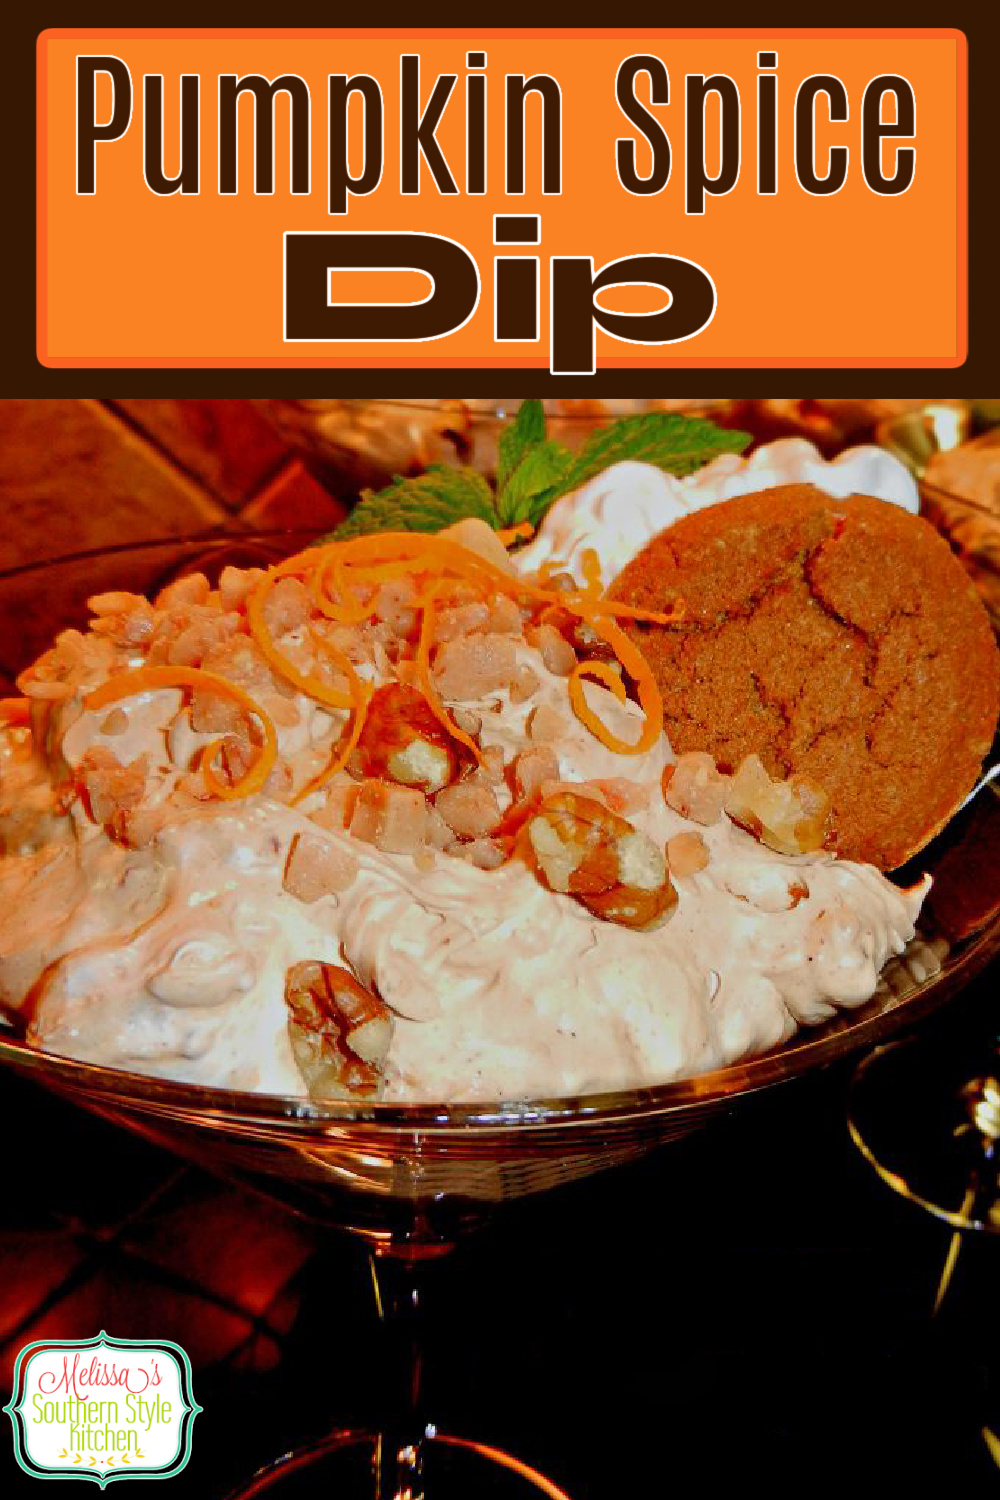 This Pumpkin Spice Dip features creamy pumpkin spice pudding, toasted walnuts and fresh orange zest for a beautiful seasonal combination #pumpkinspicedip #pumpkinspice #pumpkinrecipes #thanksgivingdesserts #pumpkindip #sweets #pumpkinspicedesserts via @melissasssk